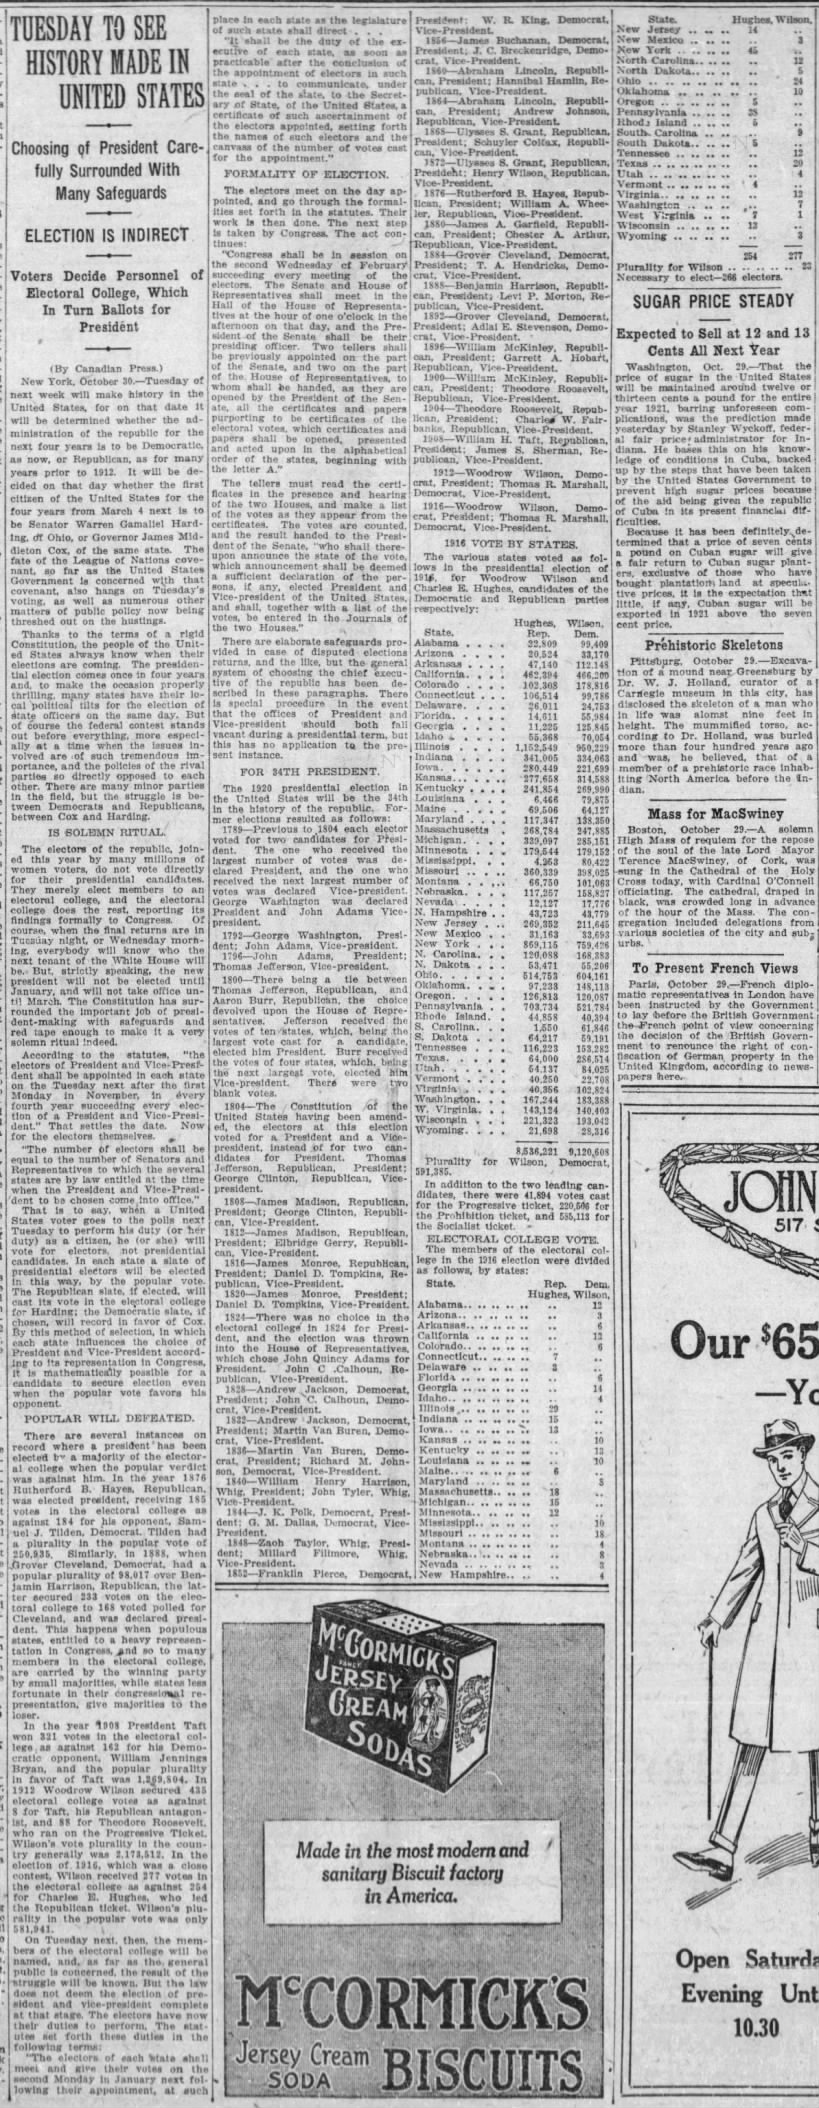 Canadian newspaper explains U.S. Electoral College ahead of 1920 presidential election